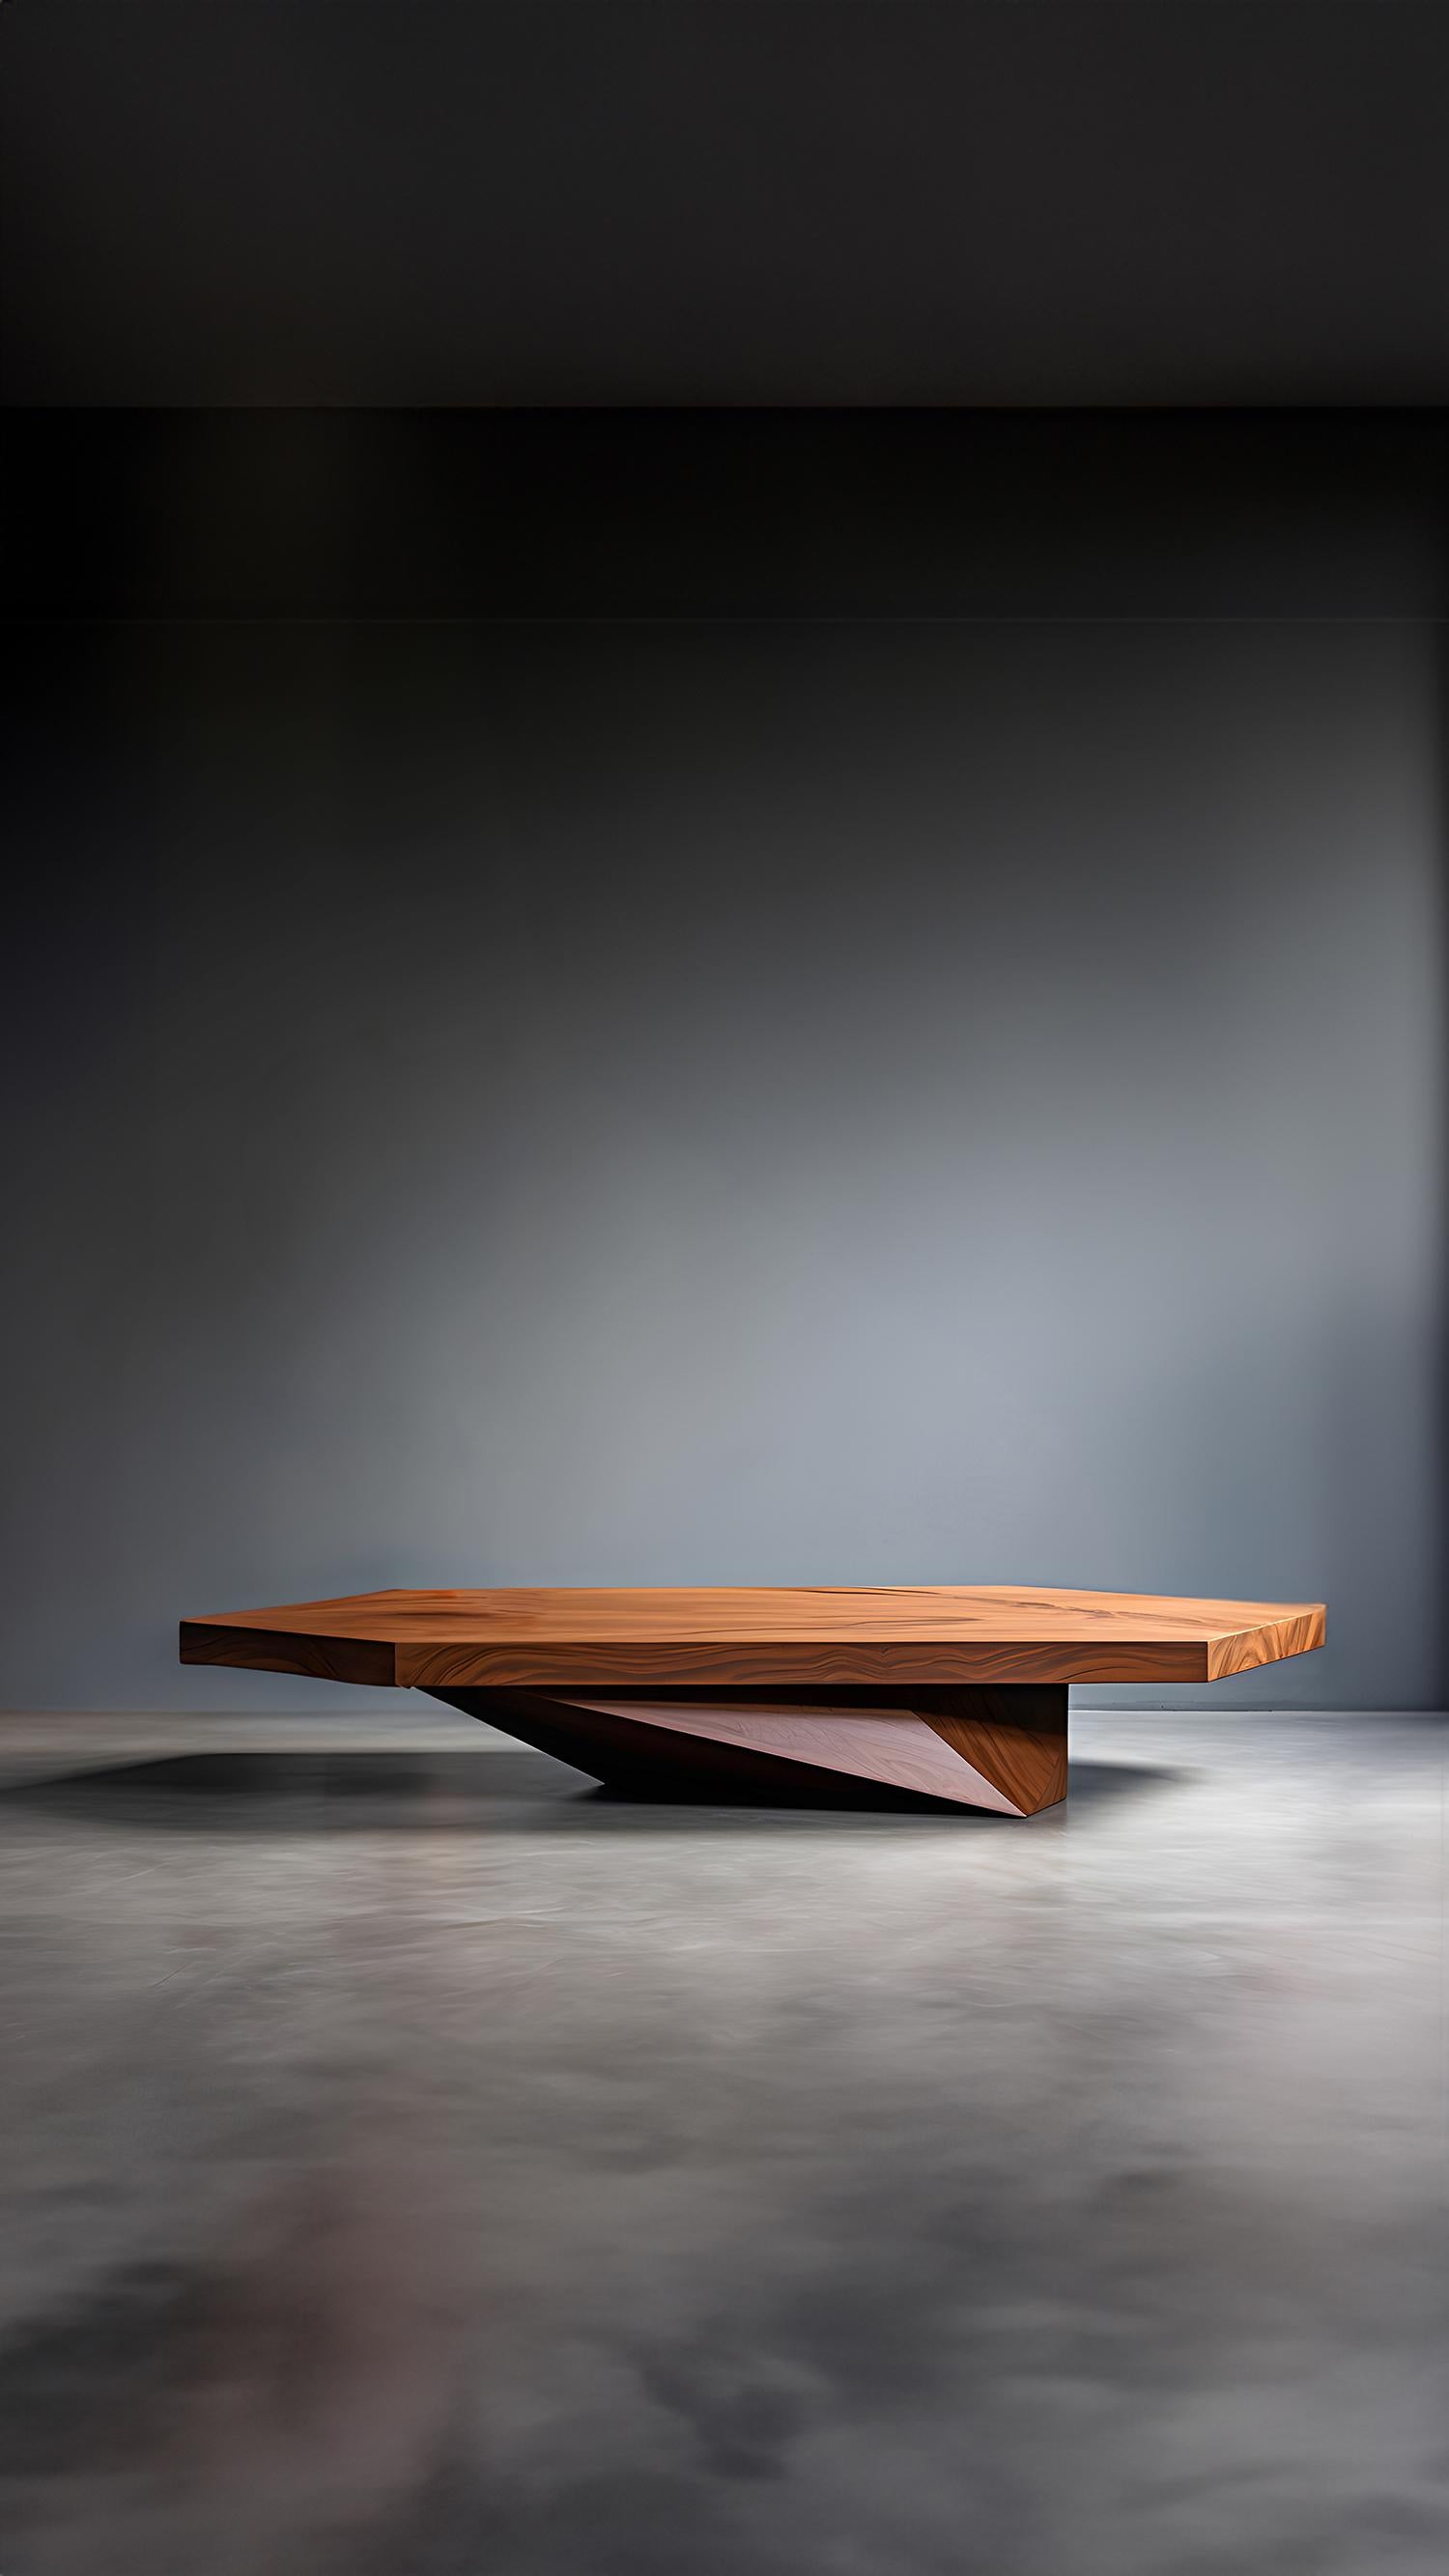 Sculptural Coffee Table Made of Solid Wood, Center Table Solace S20 by Joel Escalona


The Solace table series, designed by Joel Escalona, is a furniture collection that exudes balance and presence, thanks to its sensuous, dense, and irregular